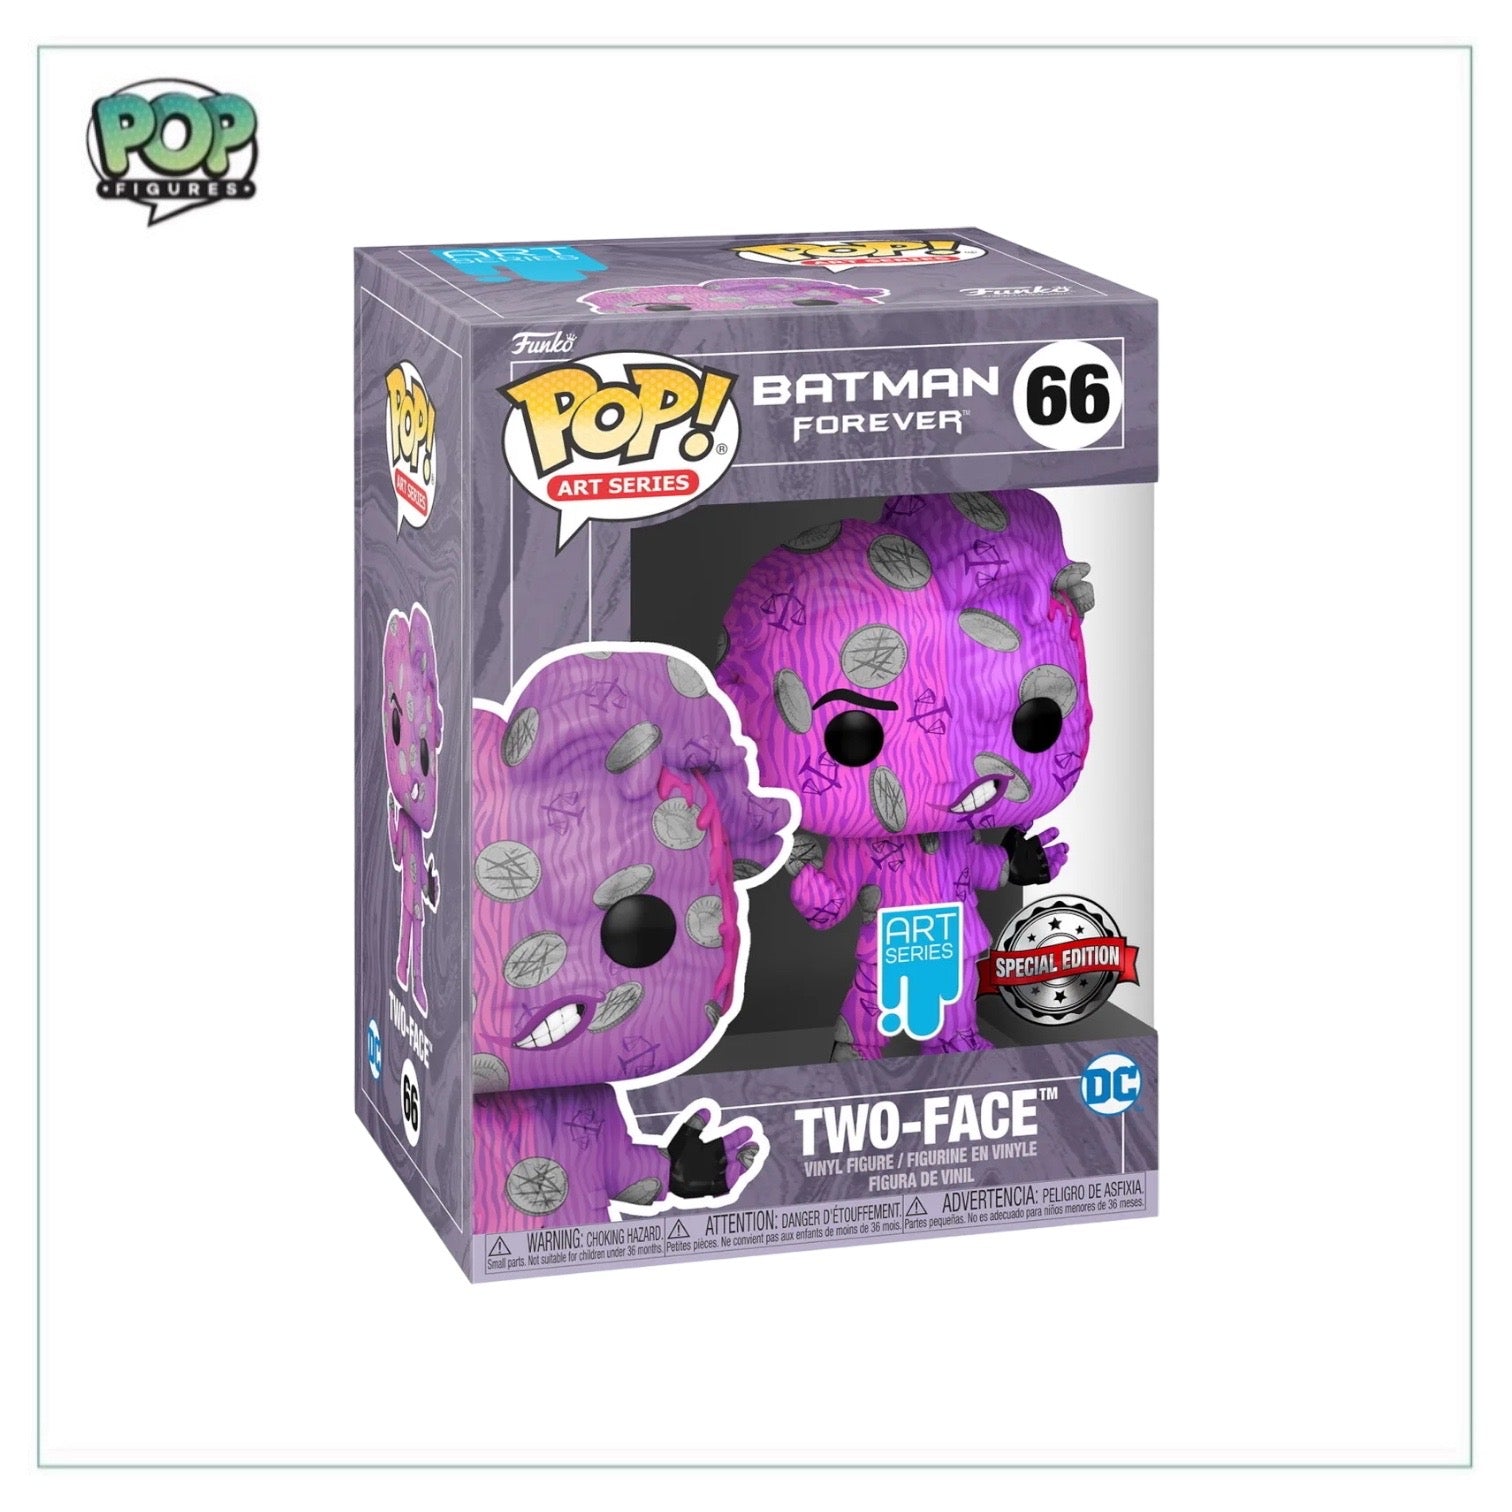 Two-Face #66 (Art Series) Funko Pop! - Batman Forever - Special Edition